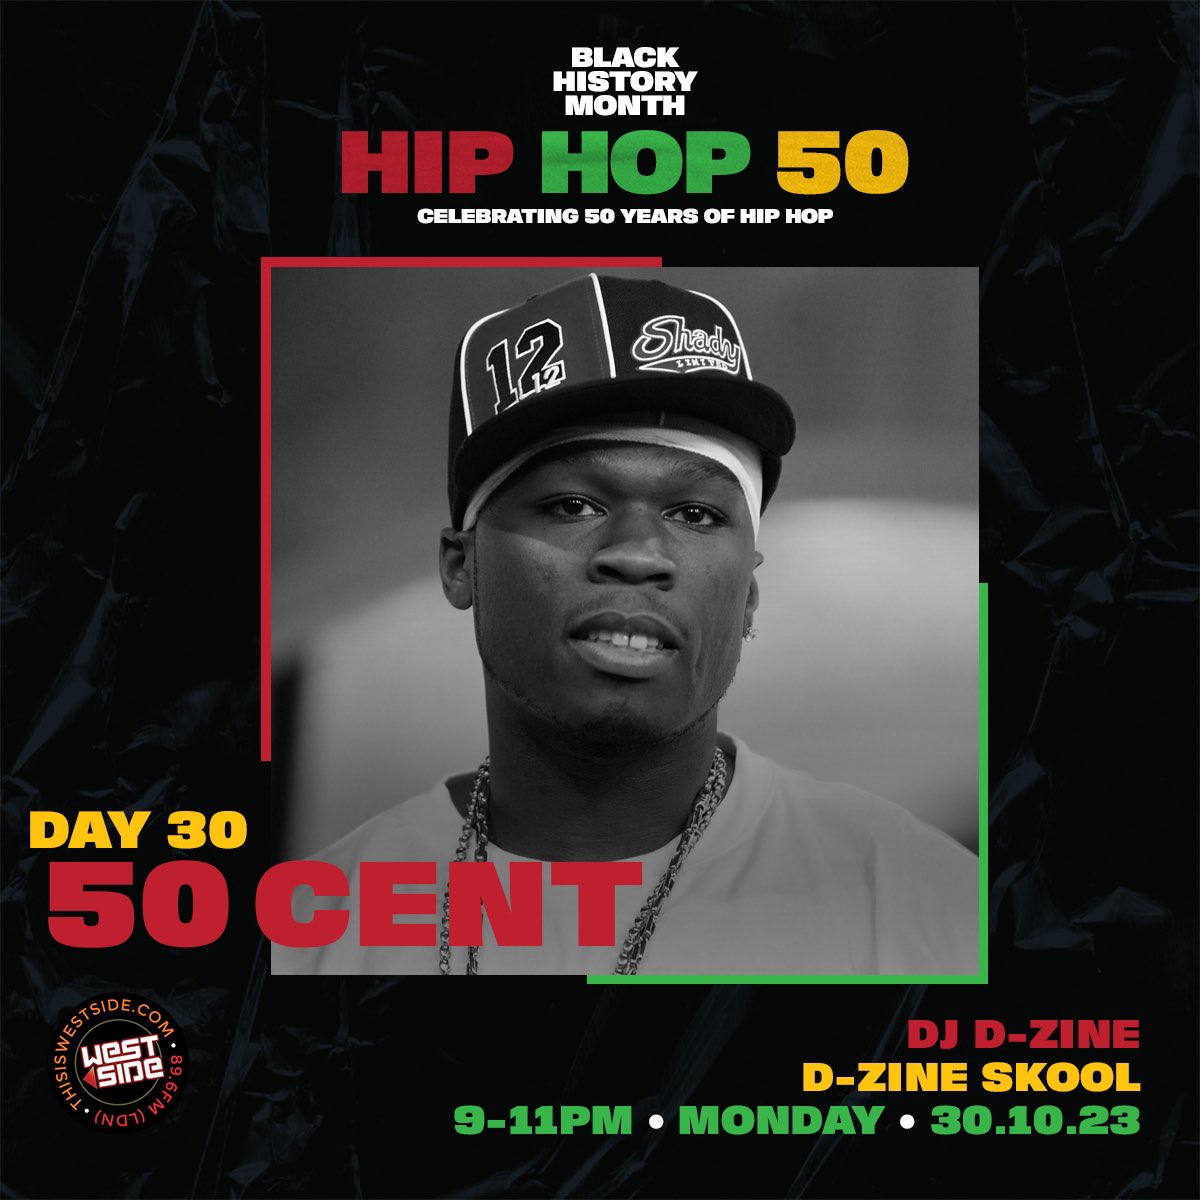 #BlackHistoryMonth Day 30 - Celebrating 50 years of Hip Hop with a tribute to the legend @50cent on #DZineSkool w/ @DjDzineOfficial 9-11pm 🔊 thisiswestside.com | 89.6FM LDN